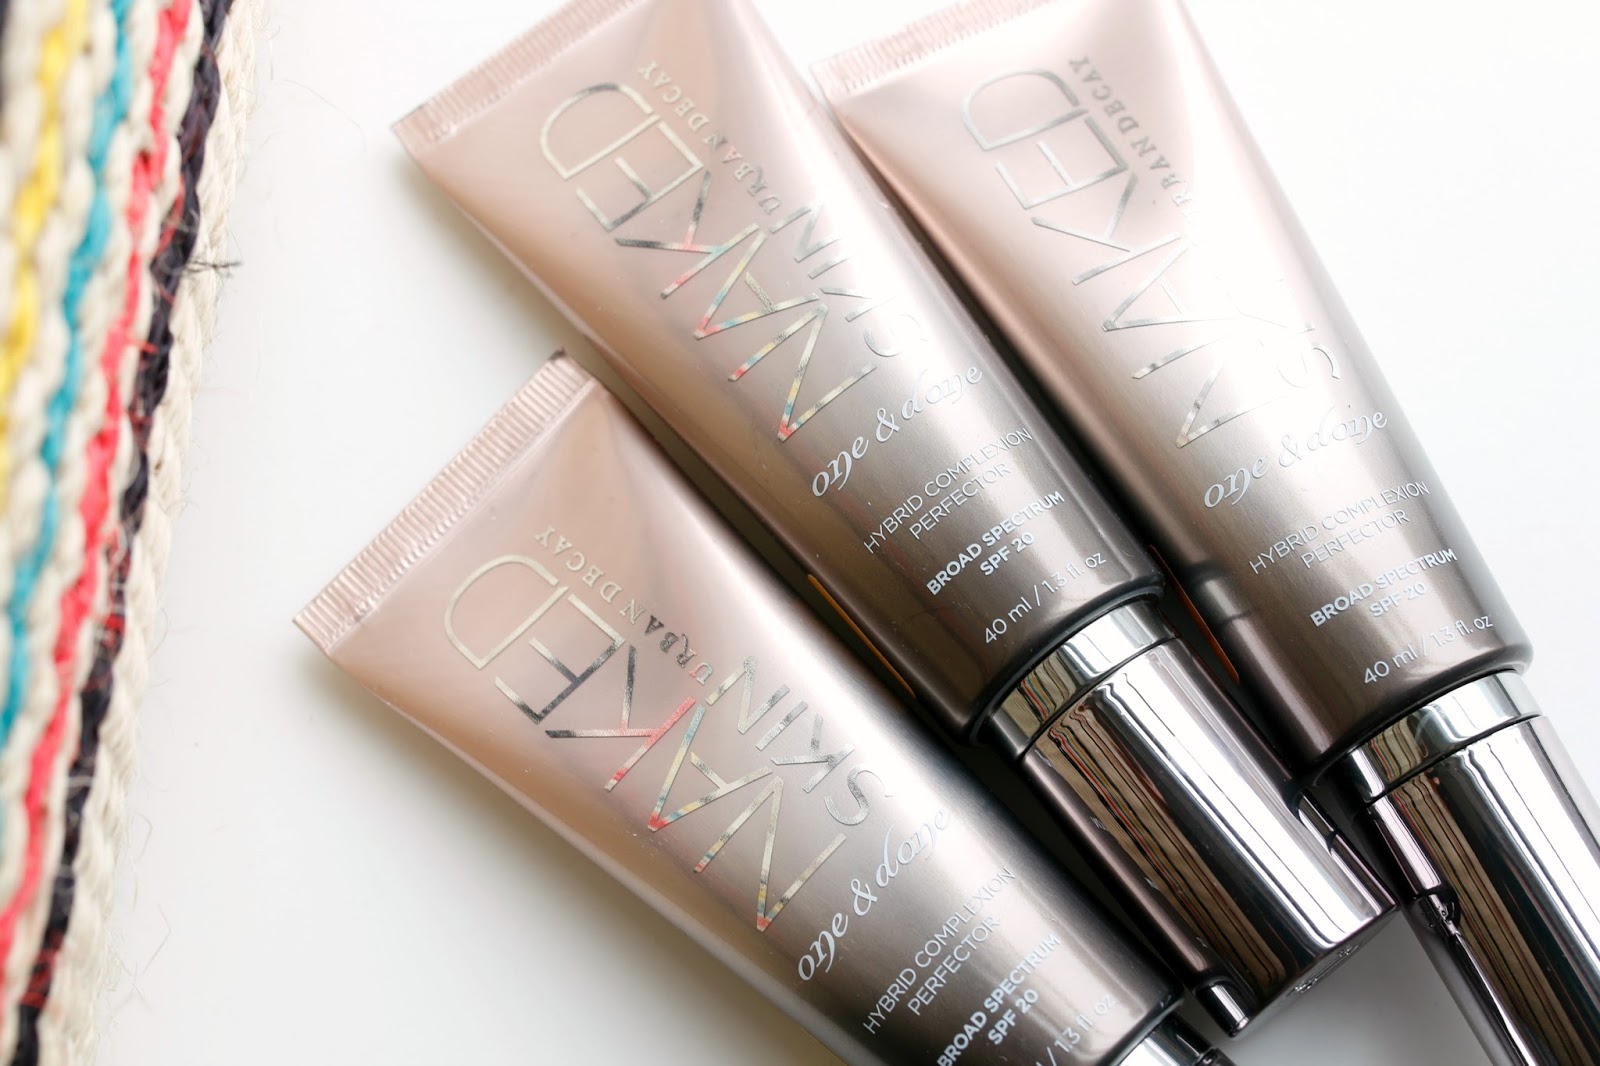 Review of the new Urban Decay Naked Skin Complexion Perfectors with swatches of every shade.